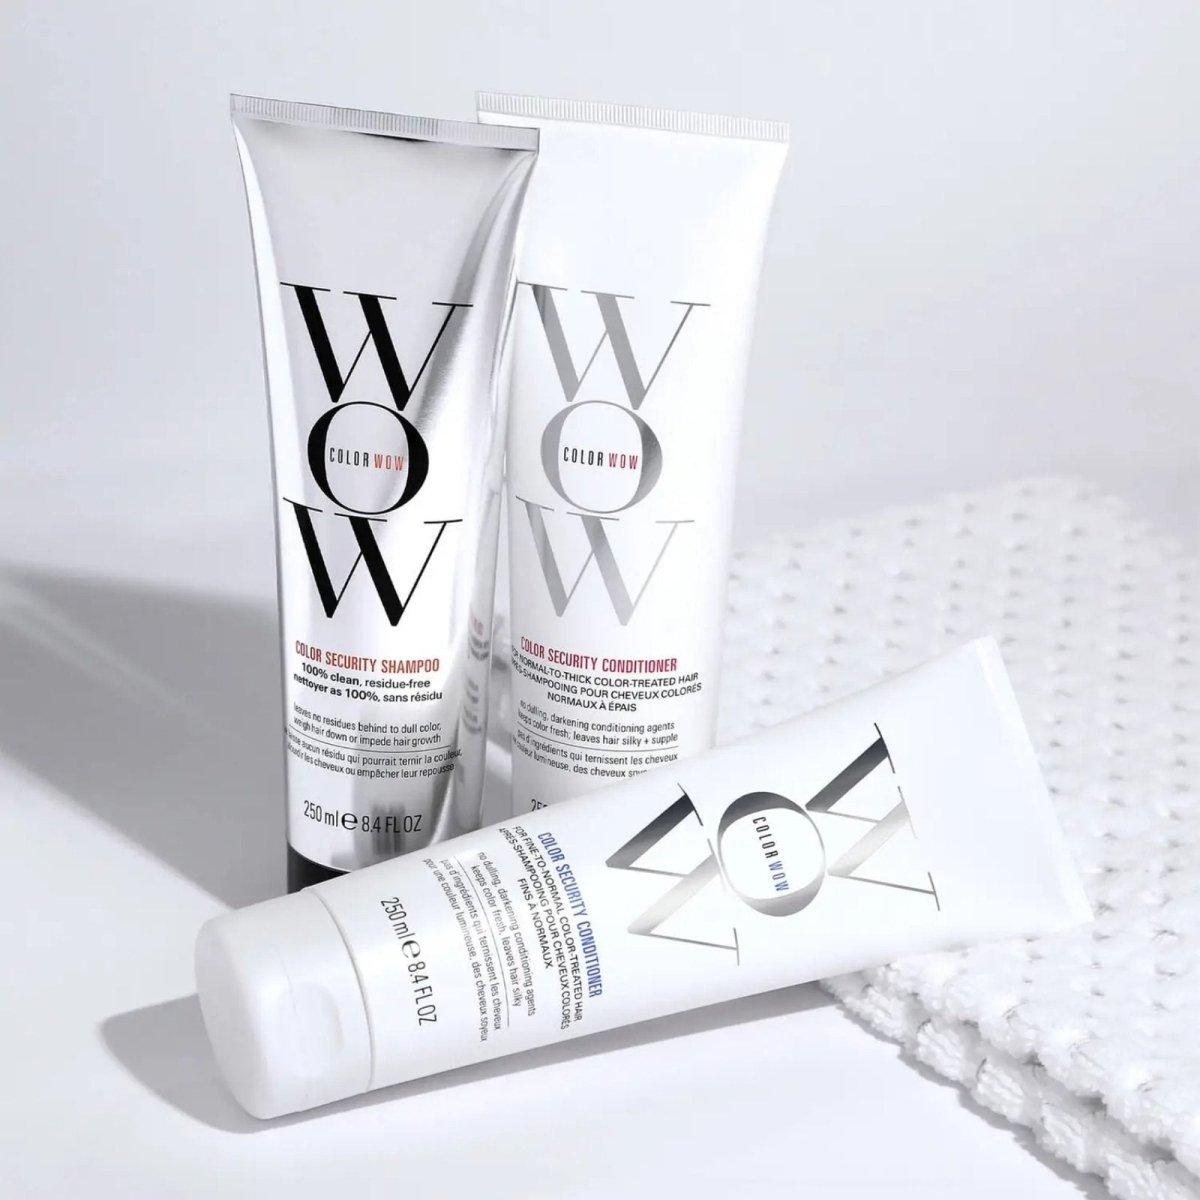 Color Wow | Color Security Conditioner 75ml | Fine to Normal Hair - DG International Ventures Limited